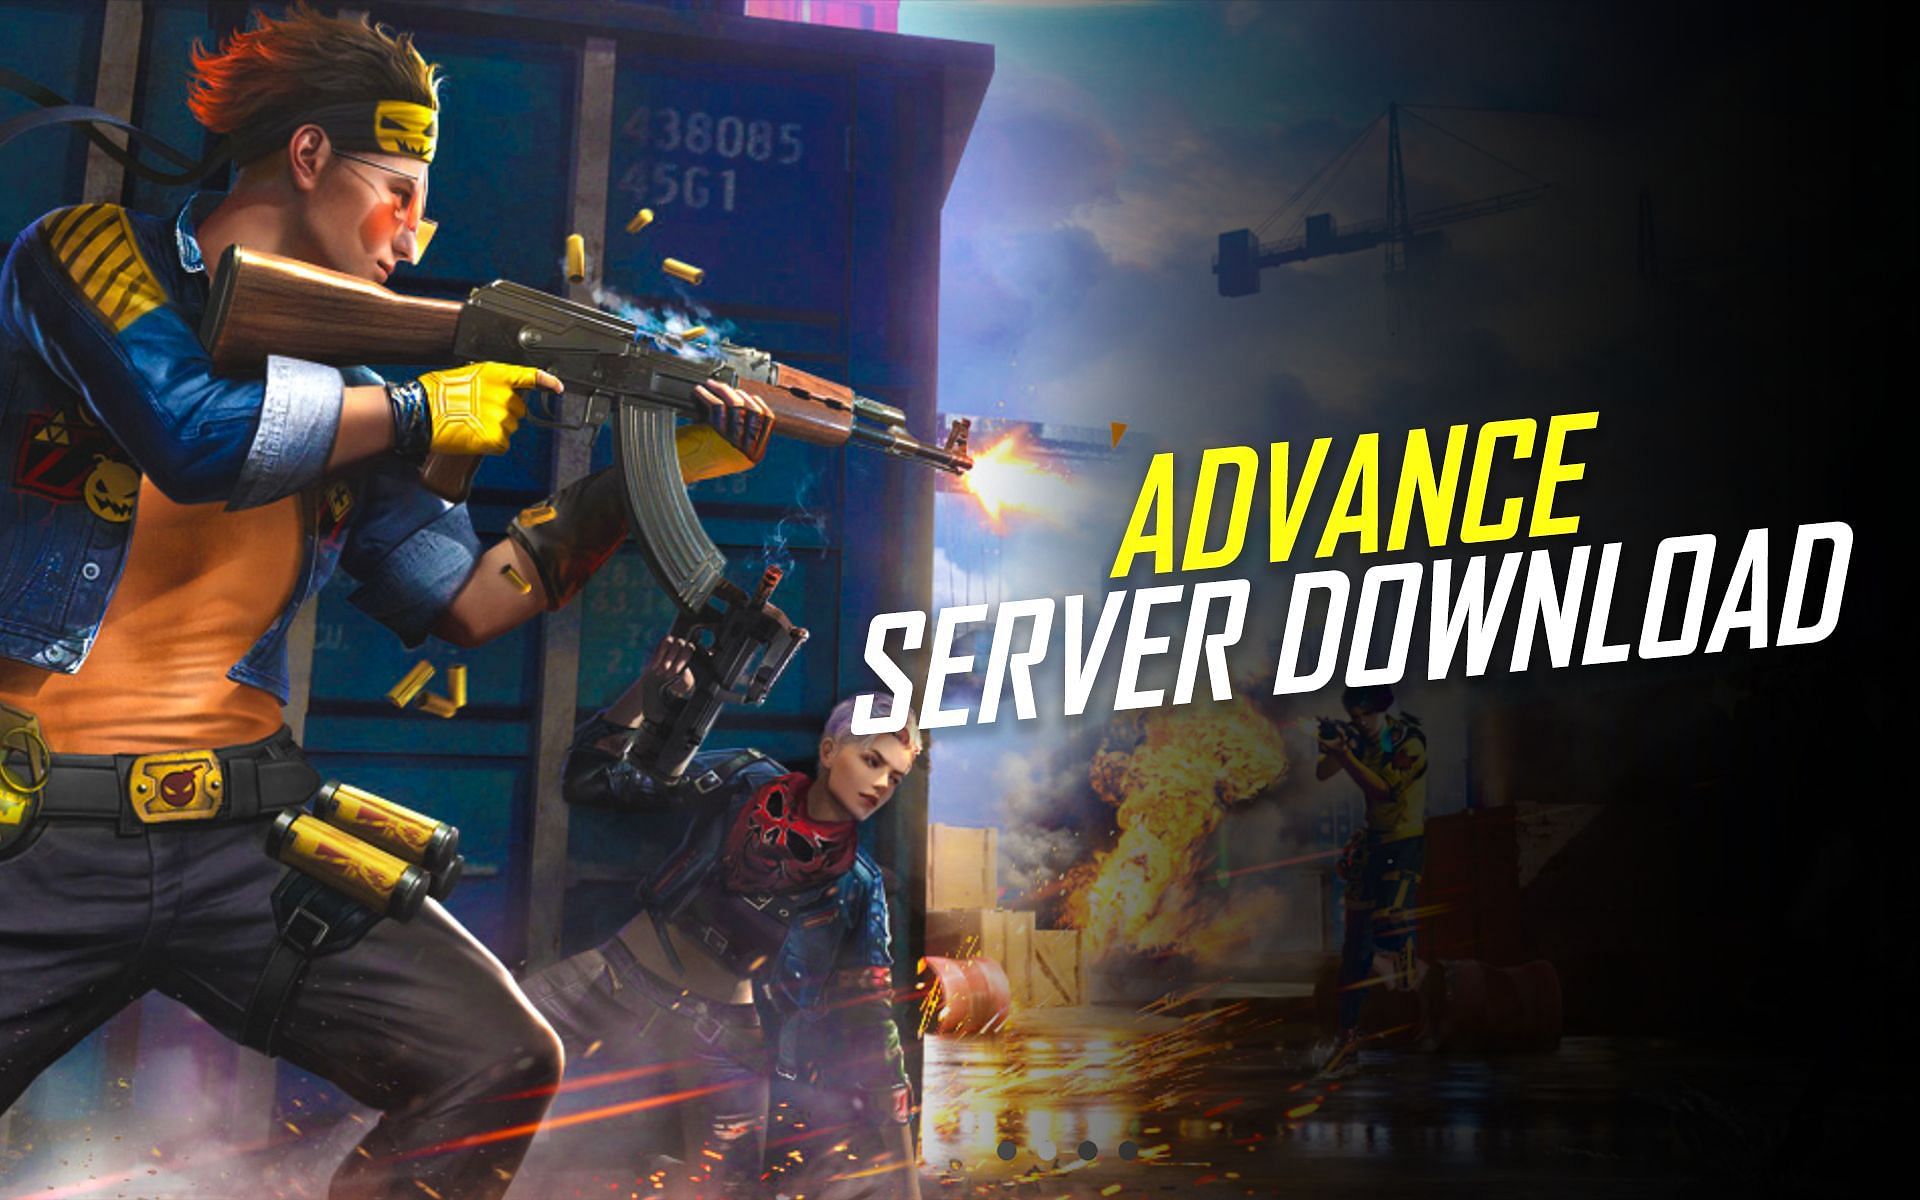 The OB35 Advance Server is available for download (Image via Sportskeeda)